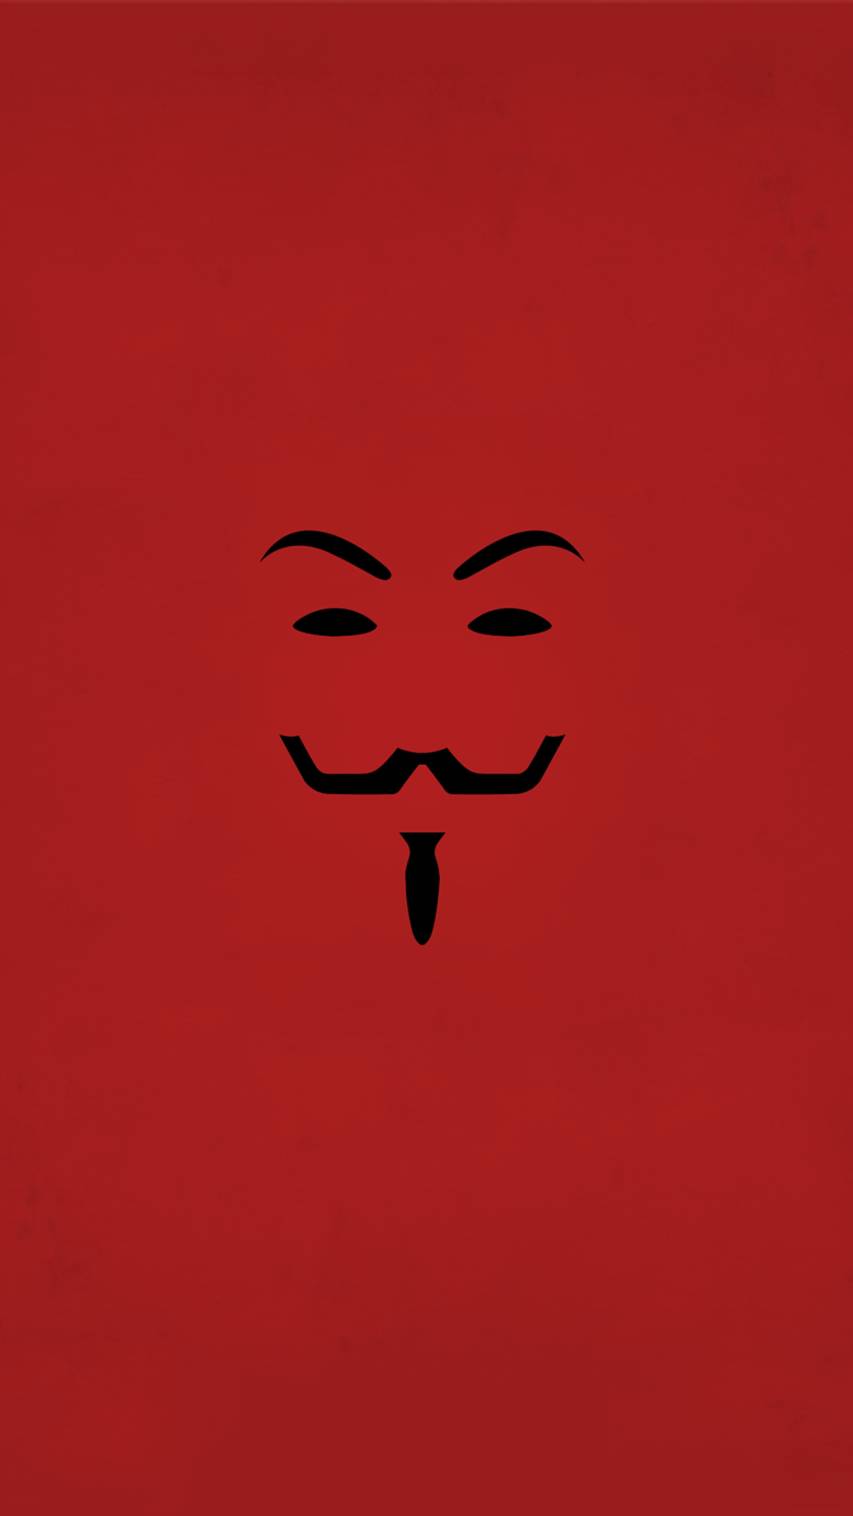 Cool Red Faces hd image Wallpapers for iPhone Lockscreens